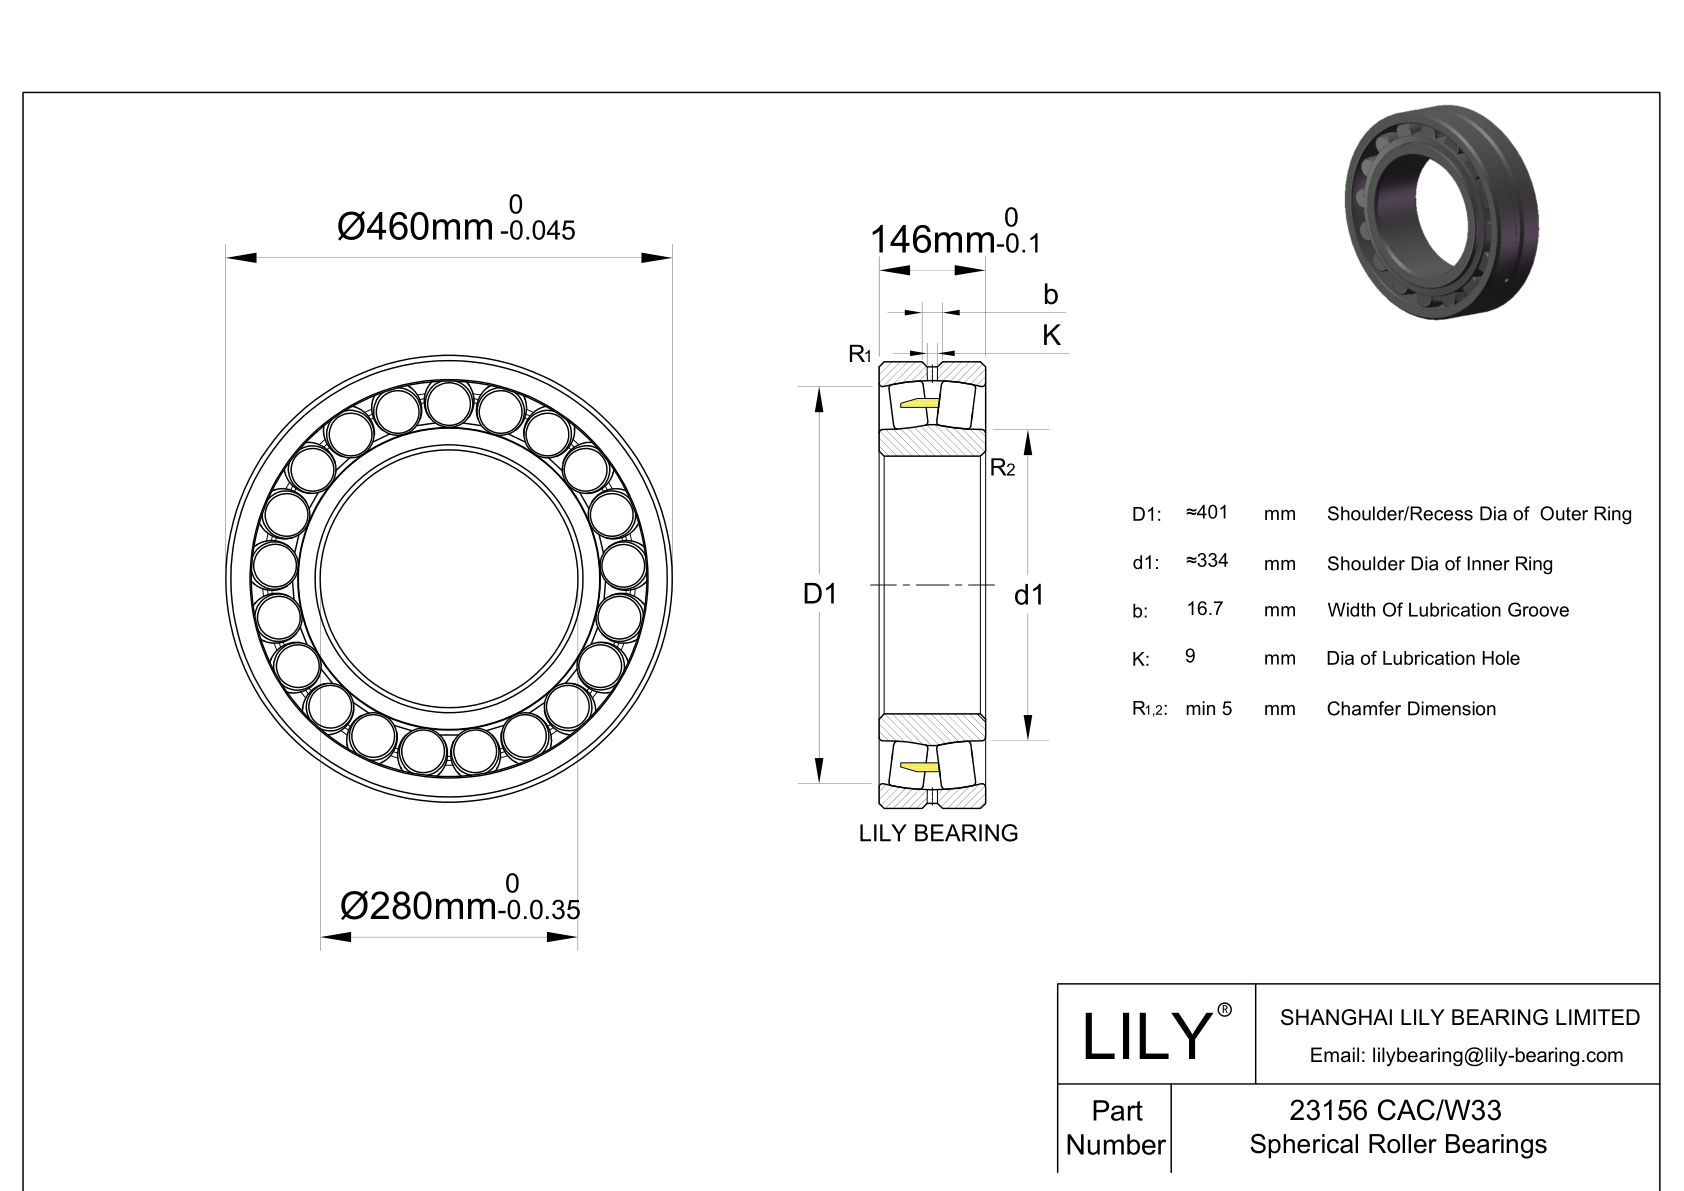 23156 CAC/W33 Double Row Spherical Roller Bearing cad drawing